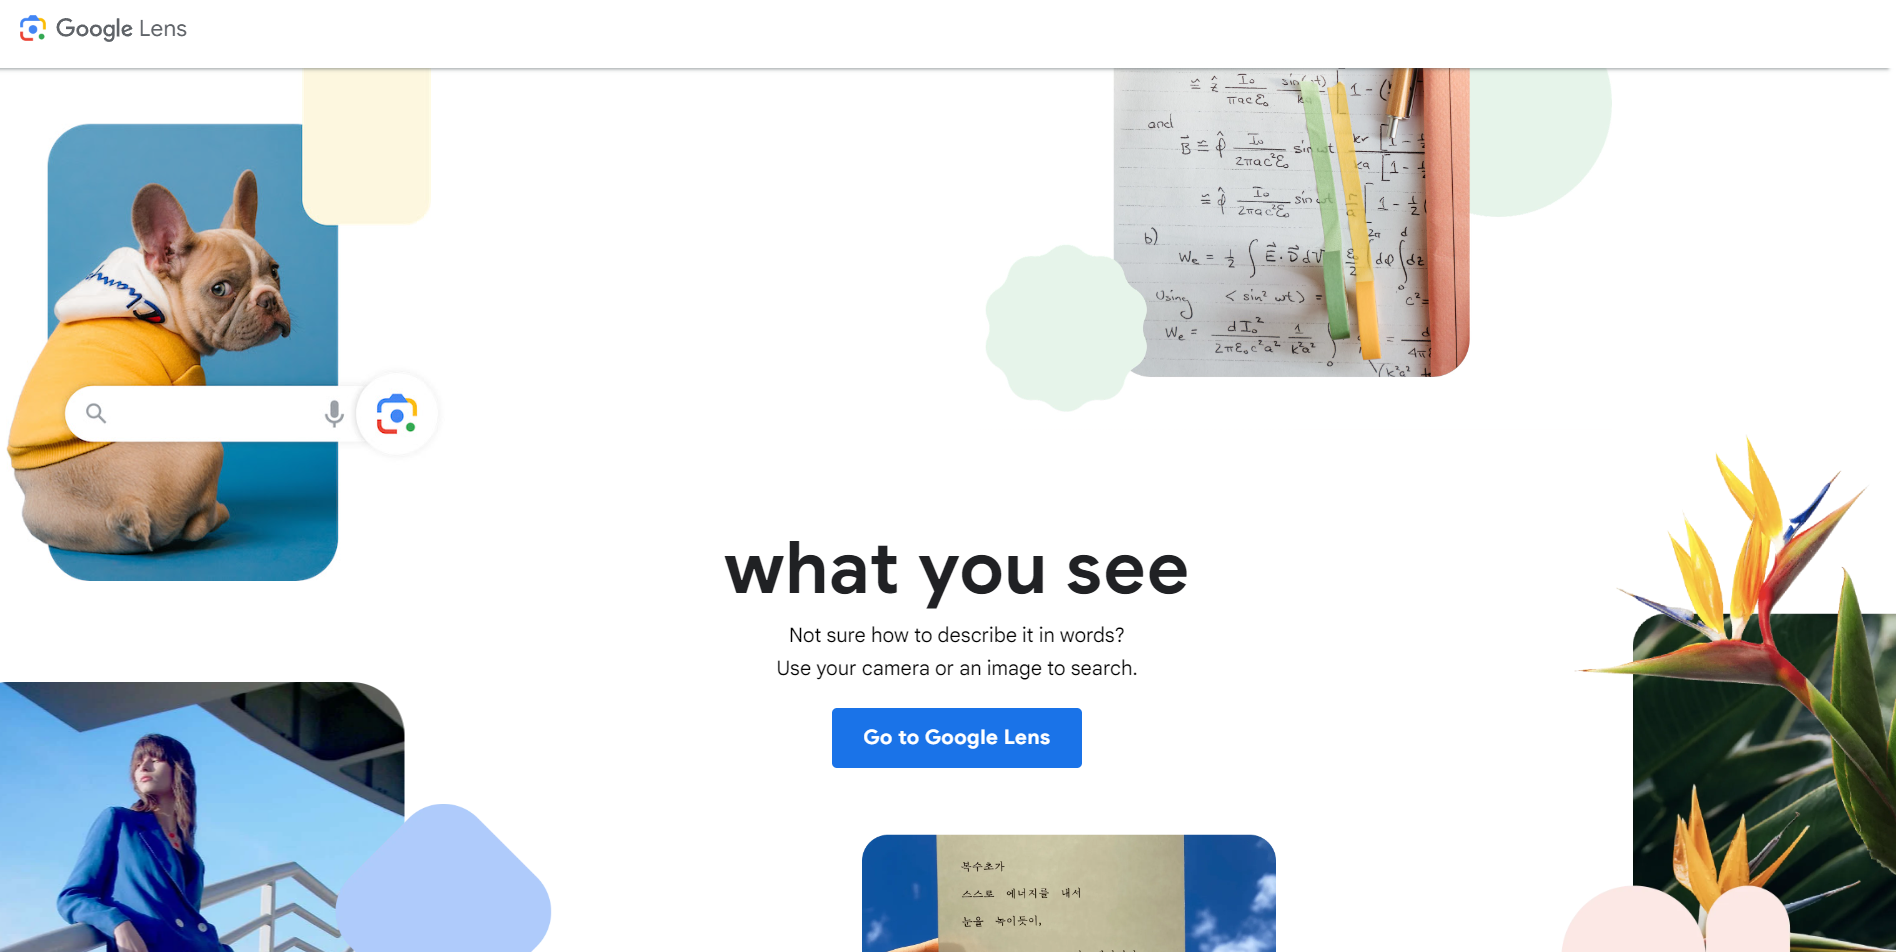 Google Lens website: Discover a powerful visual search tool that uses your phone's camera to identify objects, landmarks, and more.